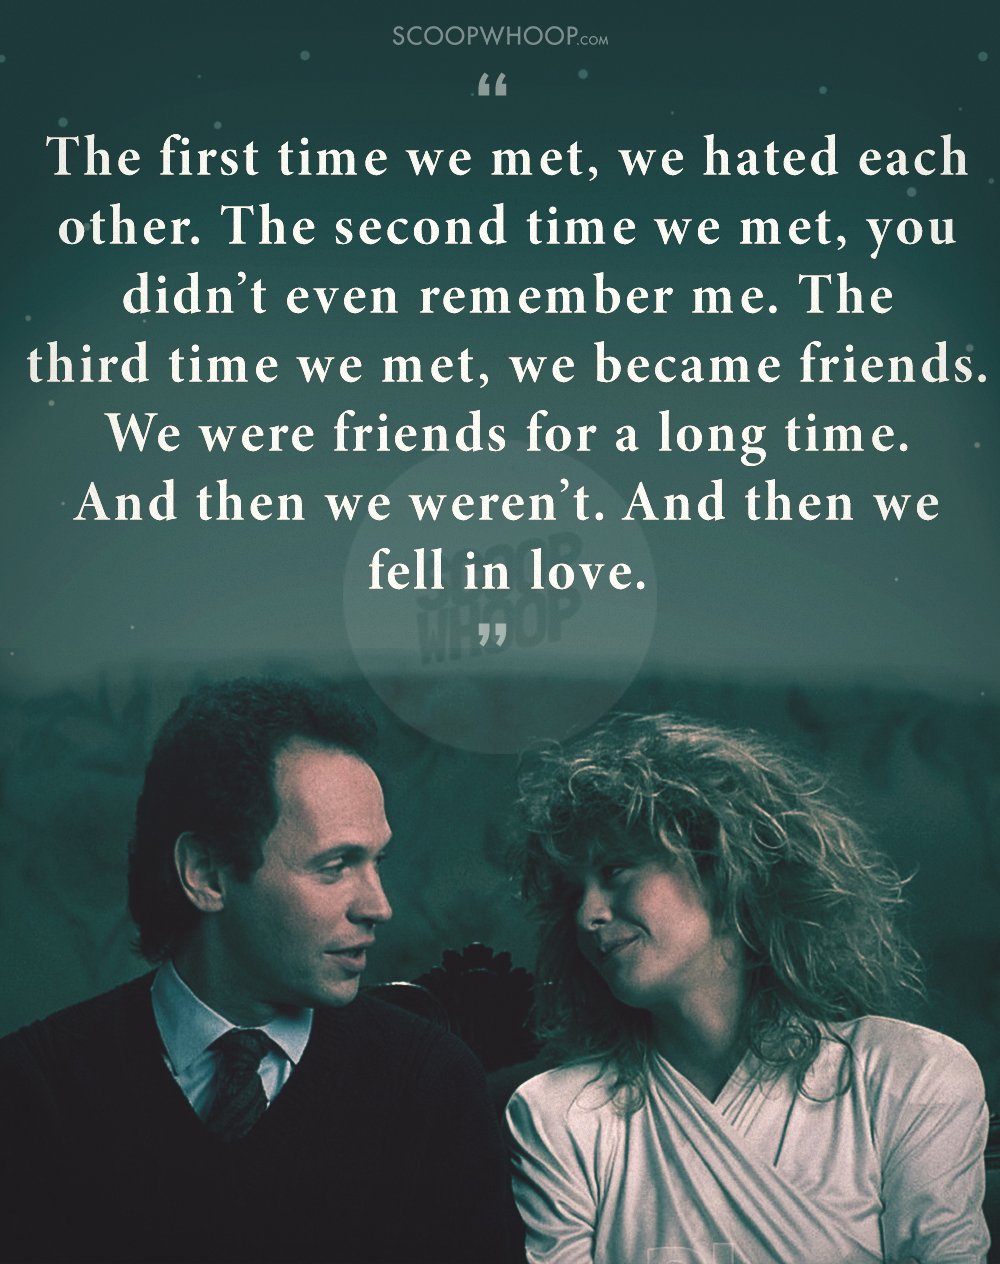 11 Quotes From ‘when Harry Met Sally That Prove Imperfect People Can Make A Perfect Relationship